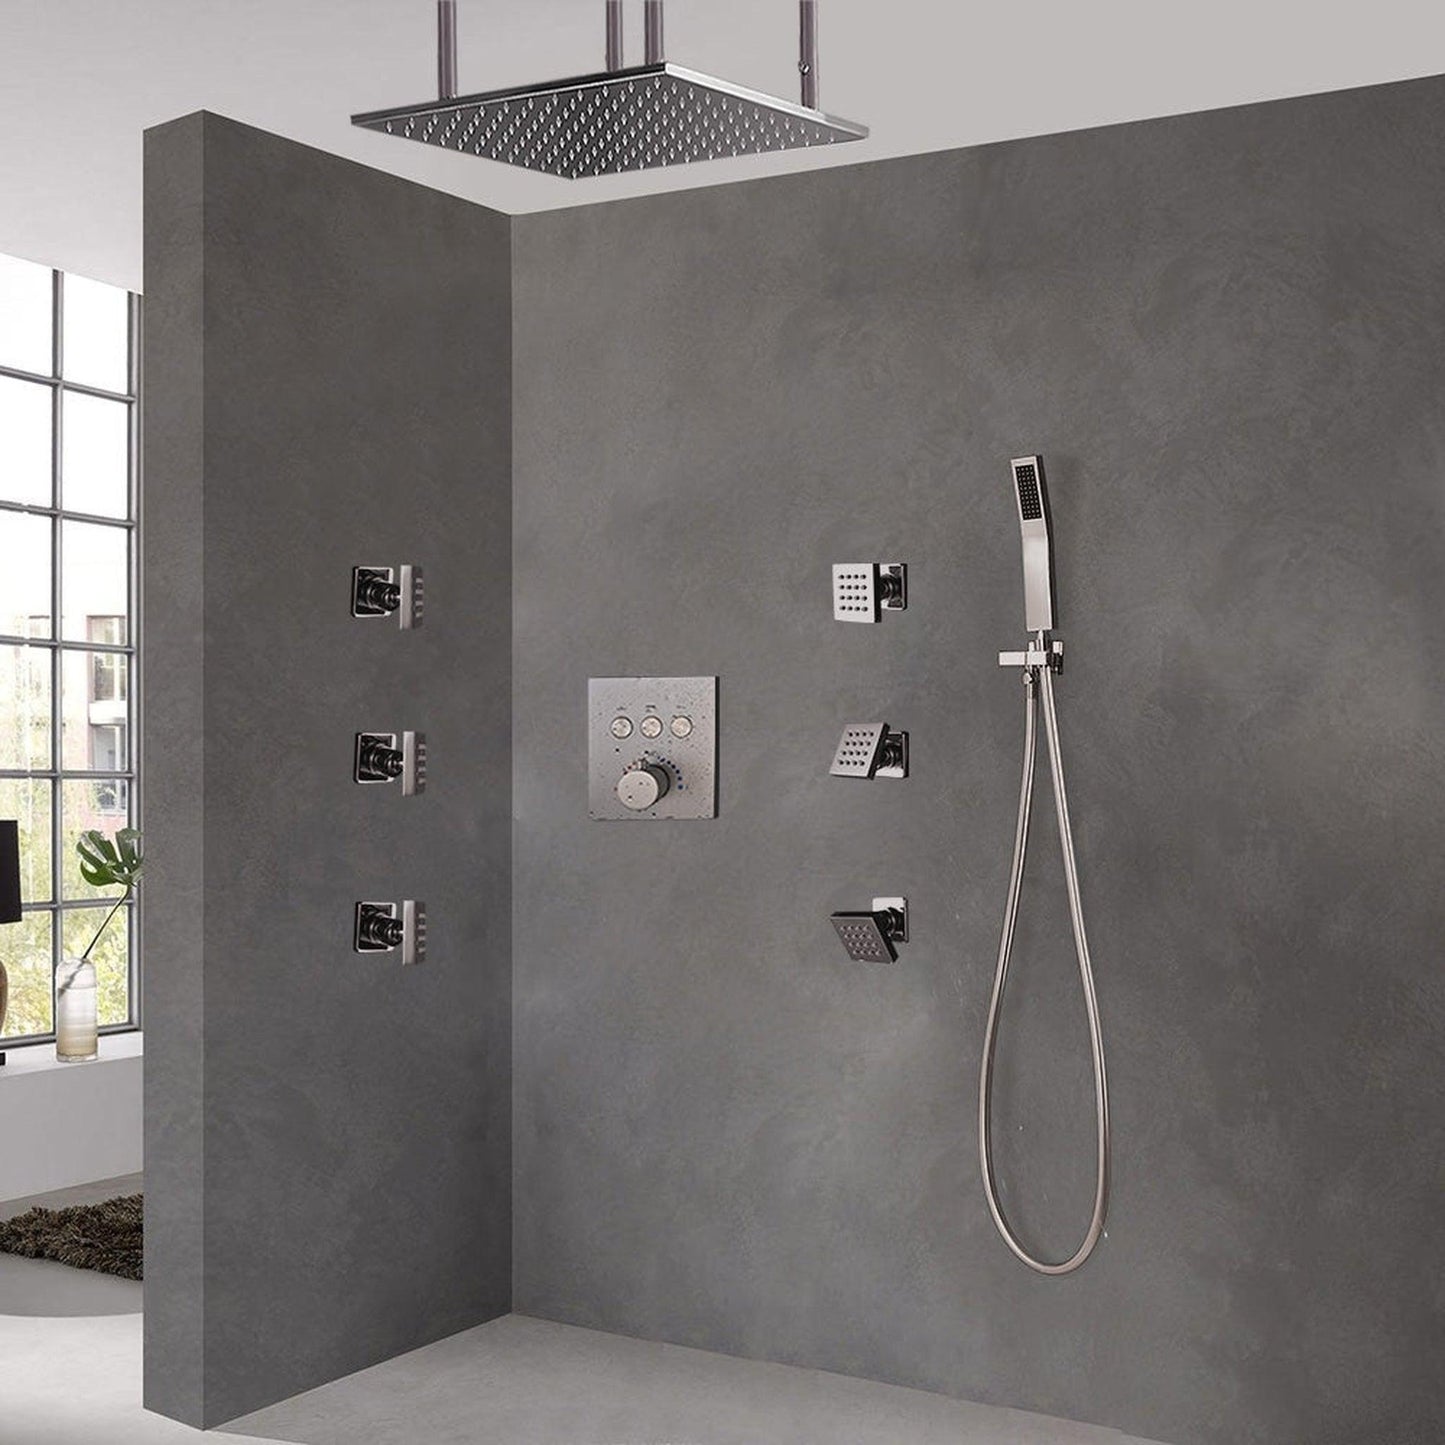 FontanaShowers Creative Luxury 24" Brushed Nickel Square Ceiling Mounted Rainfall Shower System With Thermostat Mixer, 6-Jet Body Sprays and Hand Shower